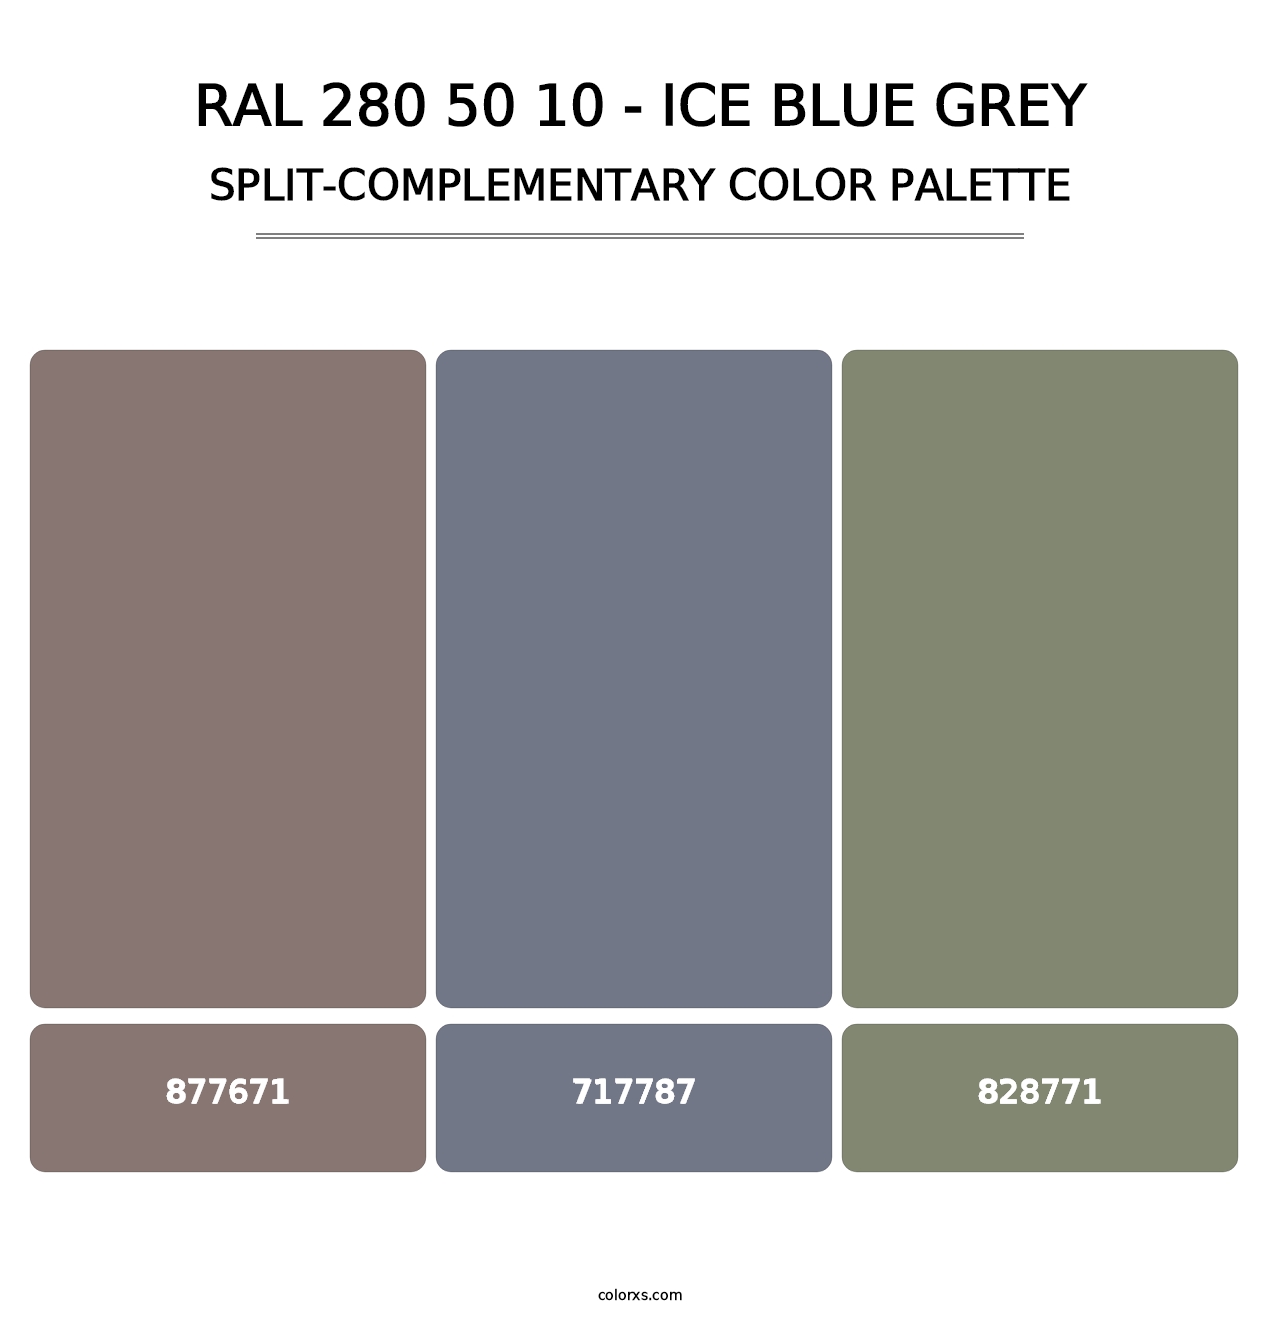 RAL 280 50 10 - Ice Blue Grey - Split-Complementary Color Palette